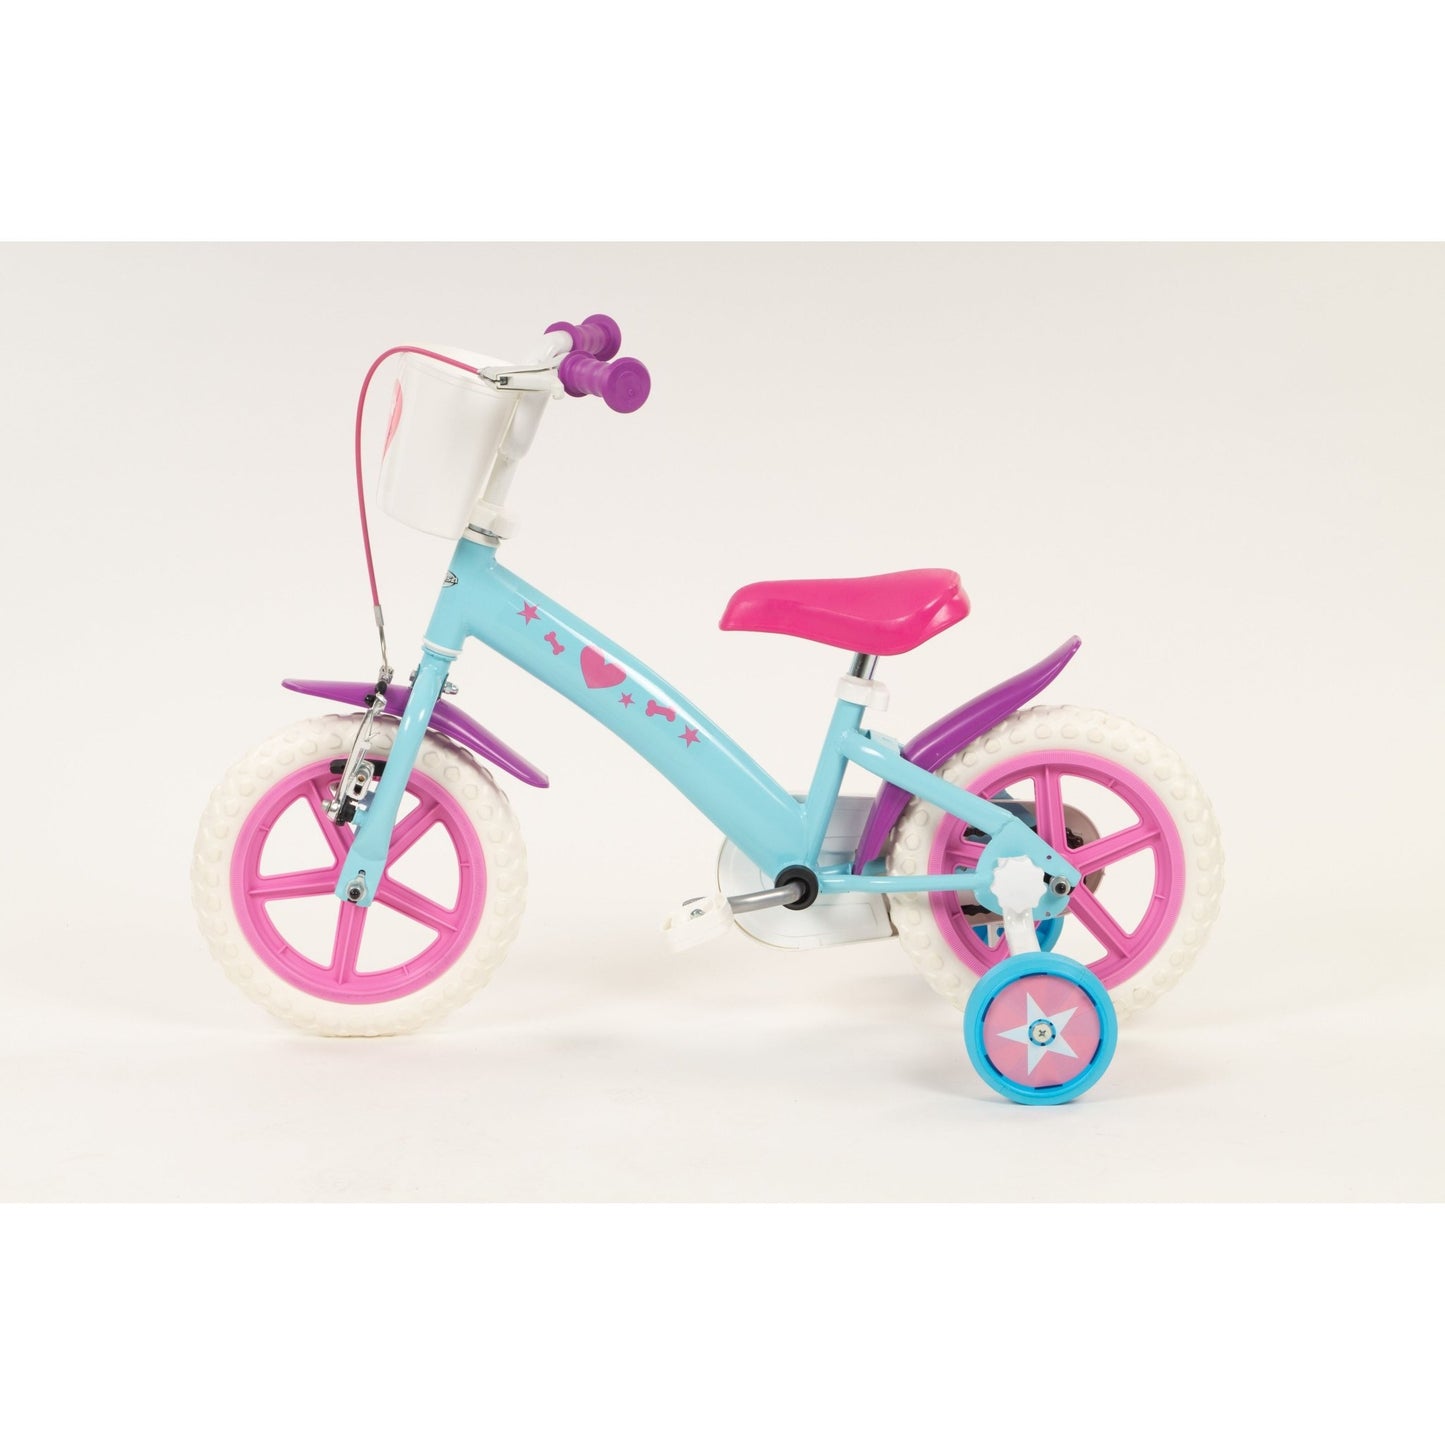 Pets Childrens Bicycle - Available in 3 Sizes - The Online Toy Shop - Bicycle - 3